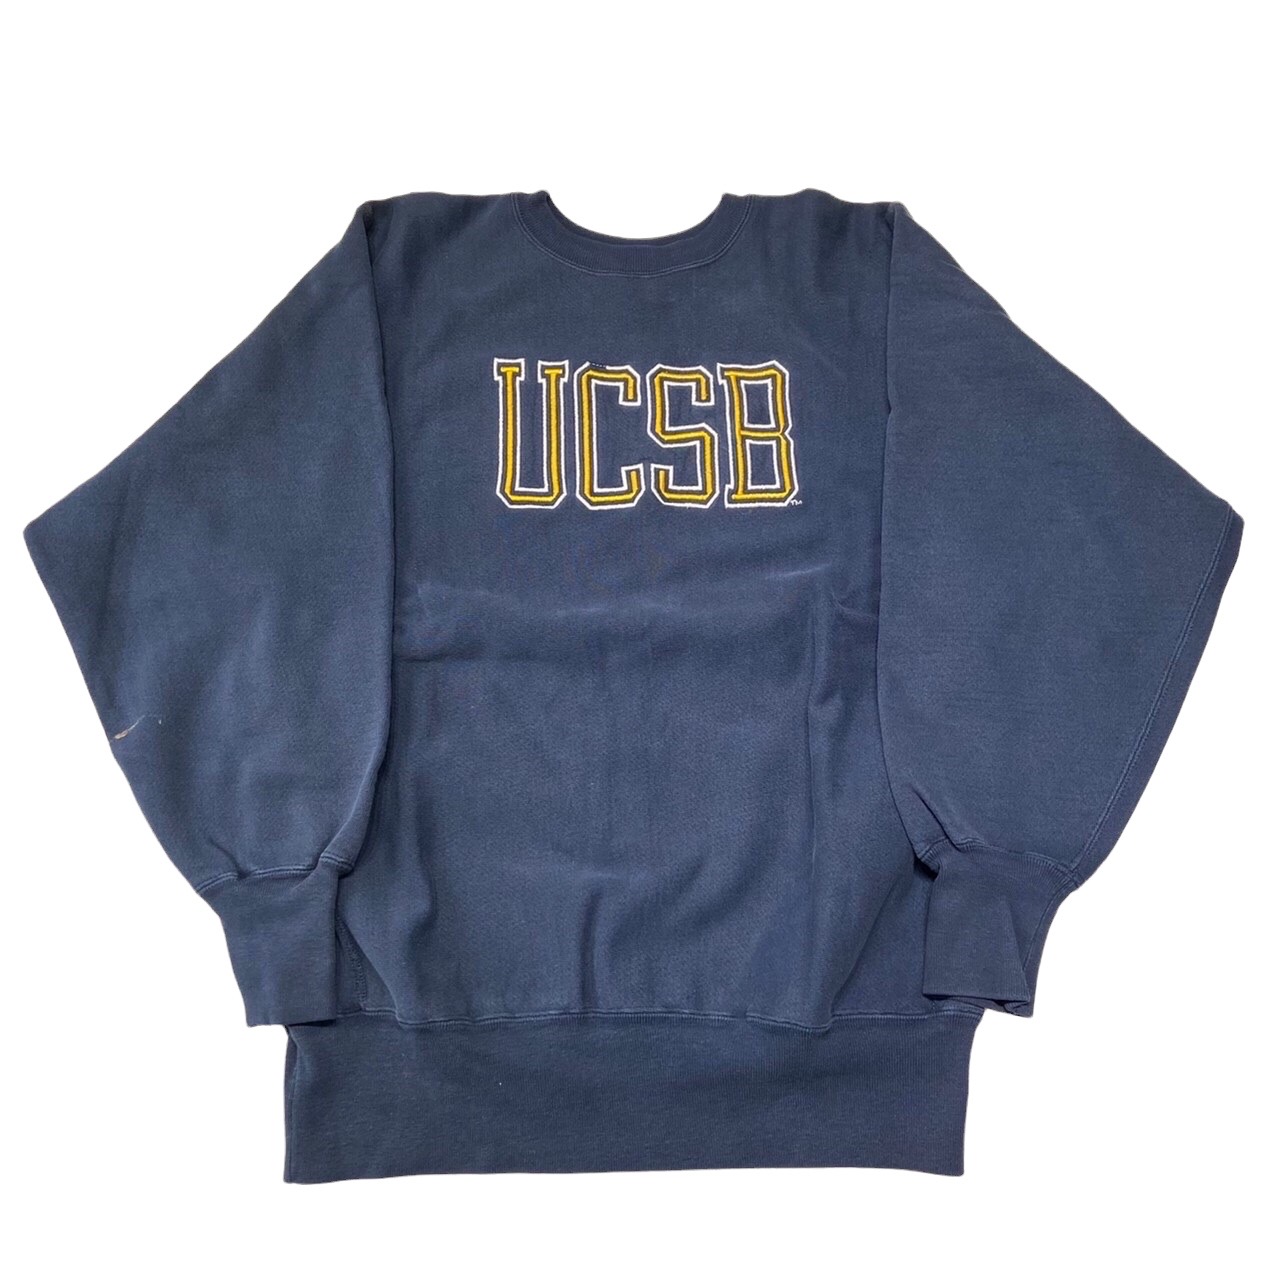 90s Champion Reverse Weave “UCSB” Made in USA (SIZE:XL 